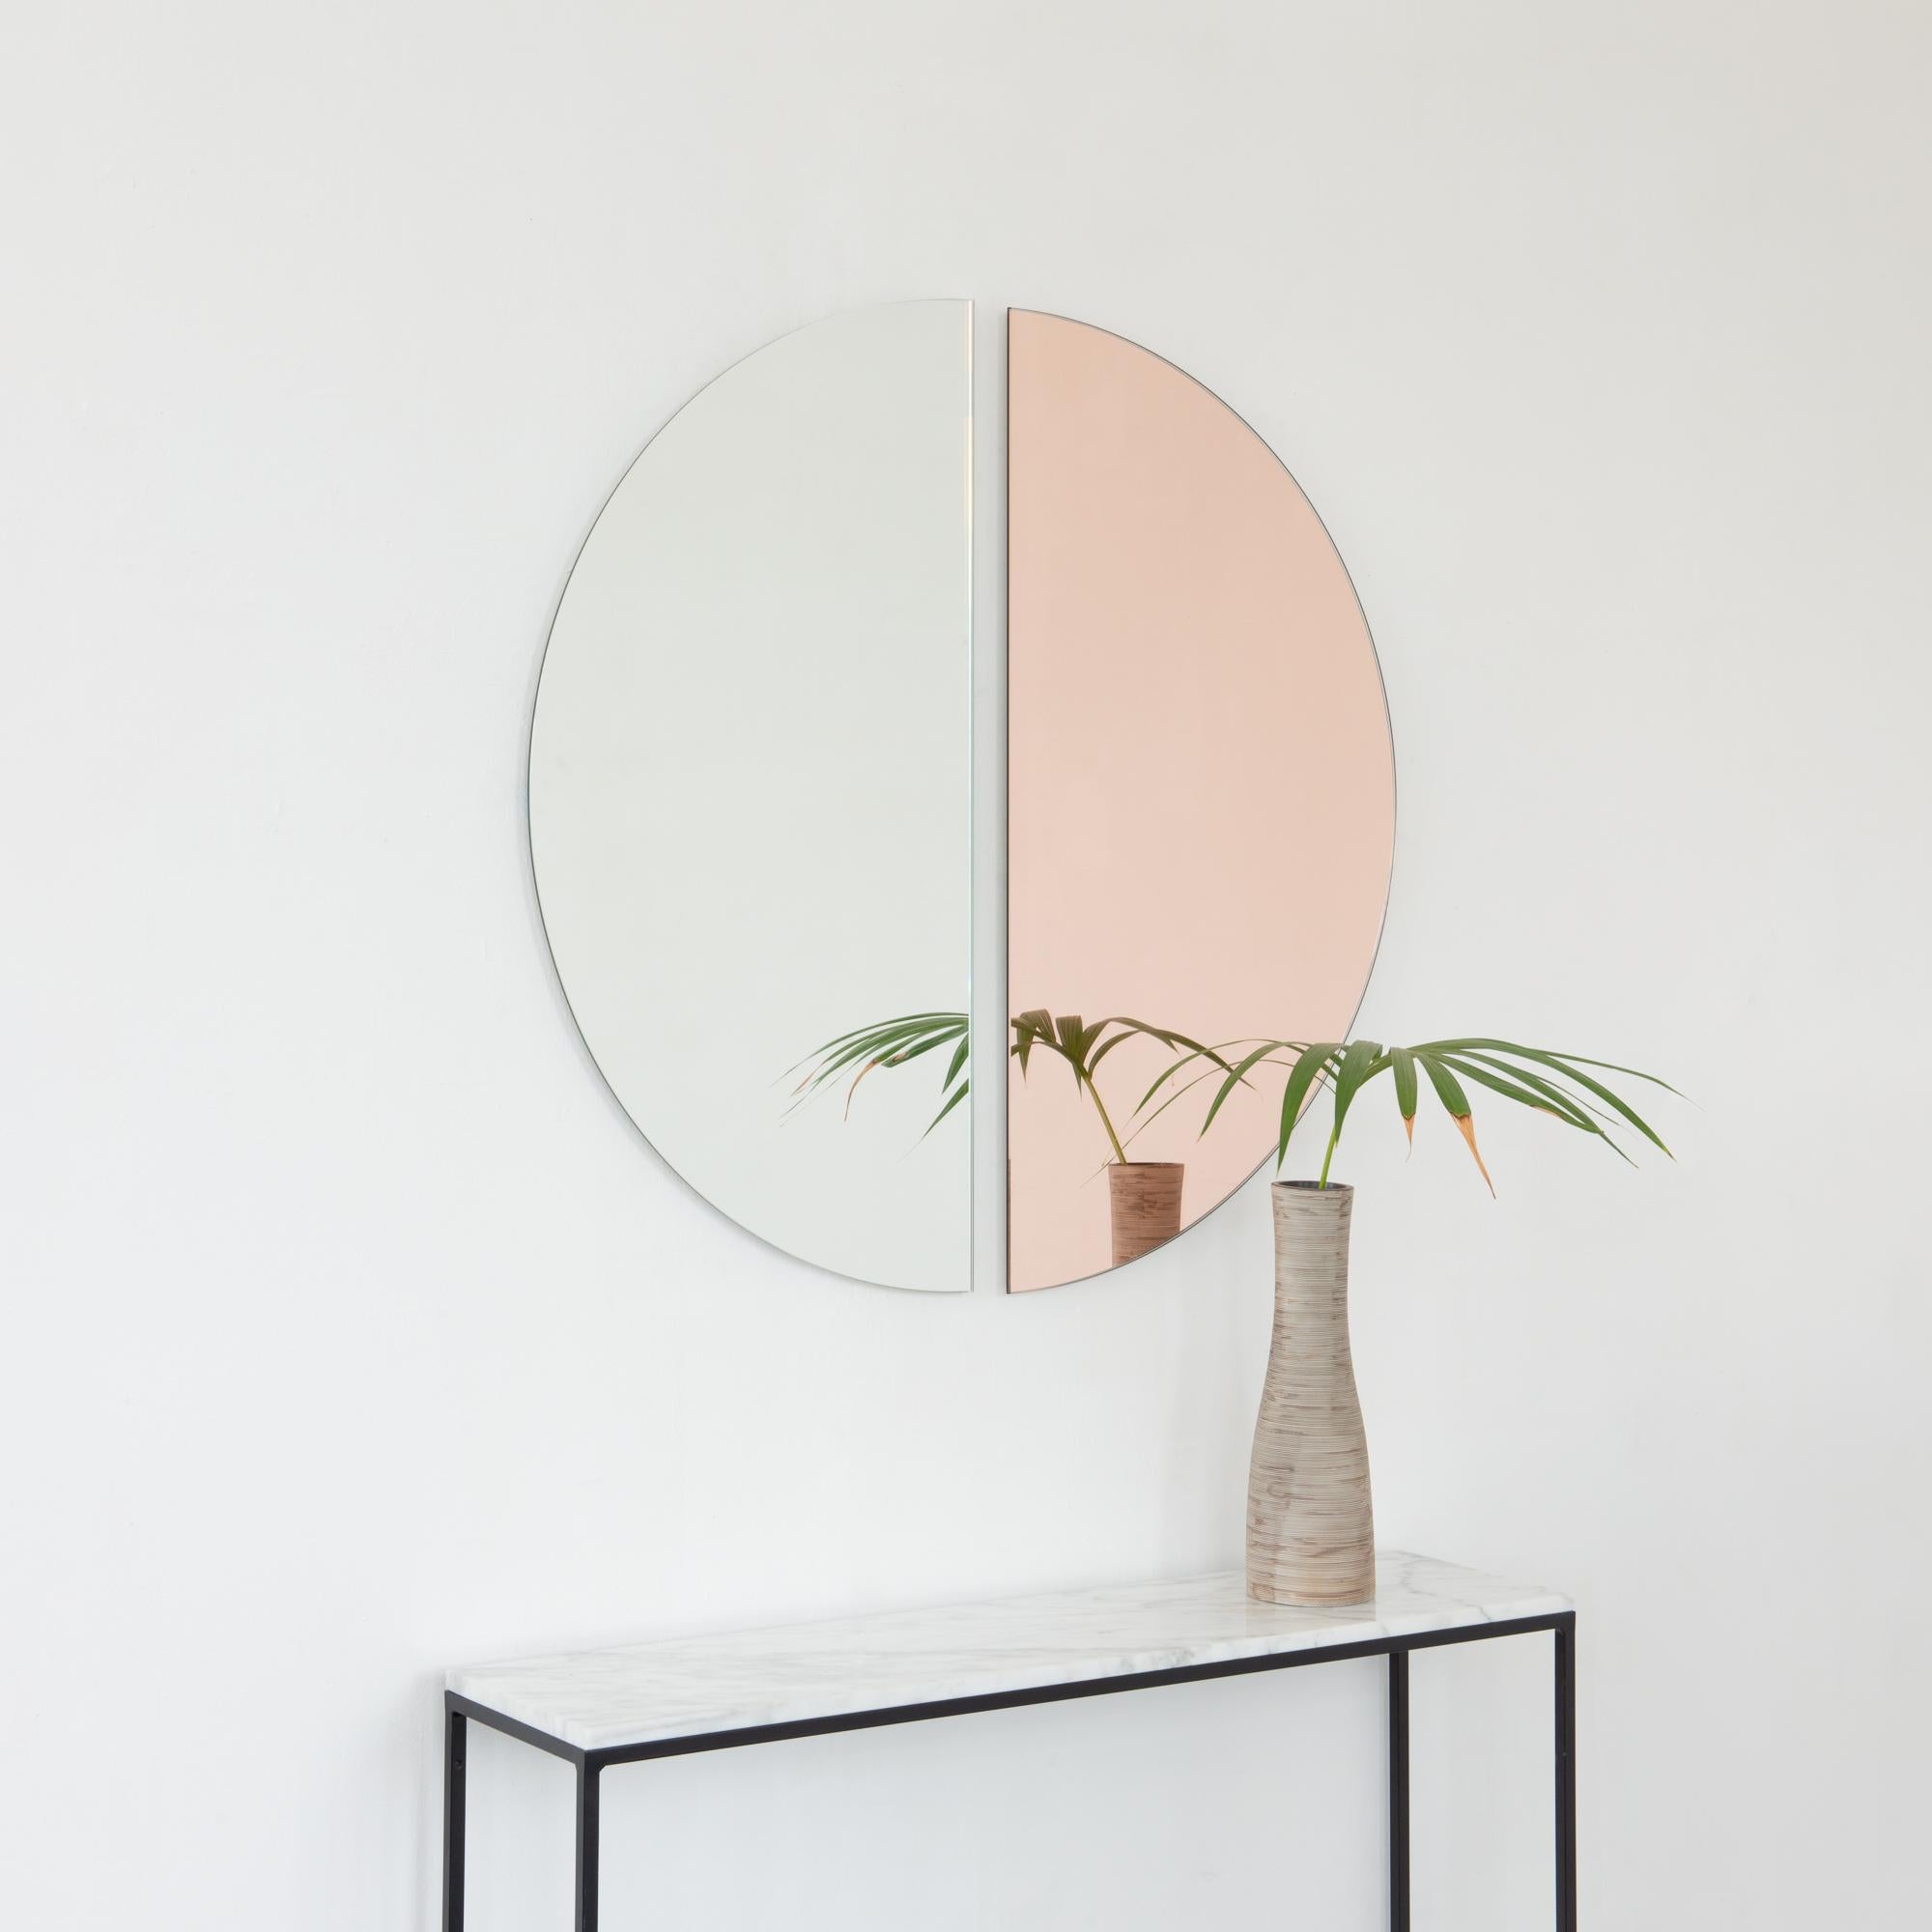 Set of two minimalist rose gold (peach) and standard silver Luna™ half-moon frameless mirrors with a floating effect. Fitted with a quality hanging system for a flexible installation in 4 different directions. Designed and made in London, UK. 

Our